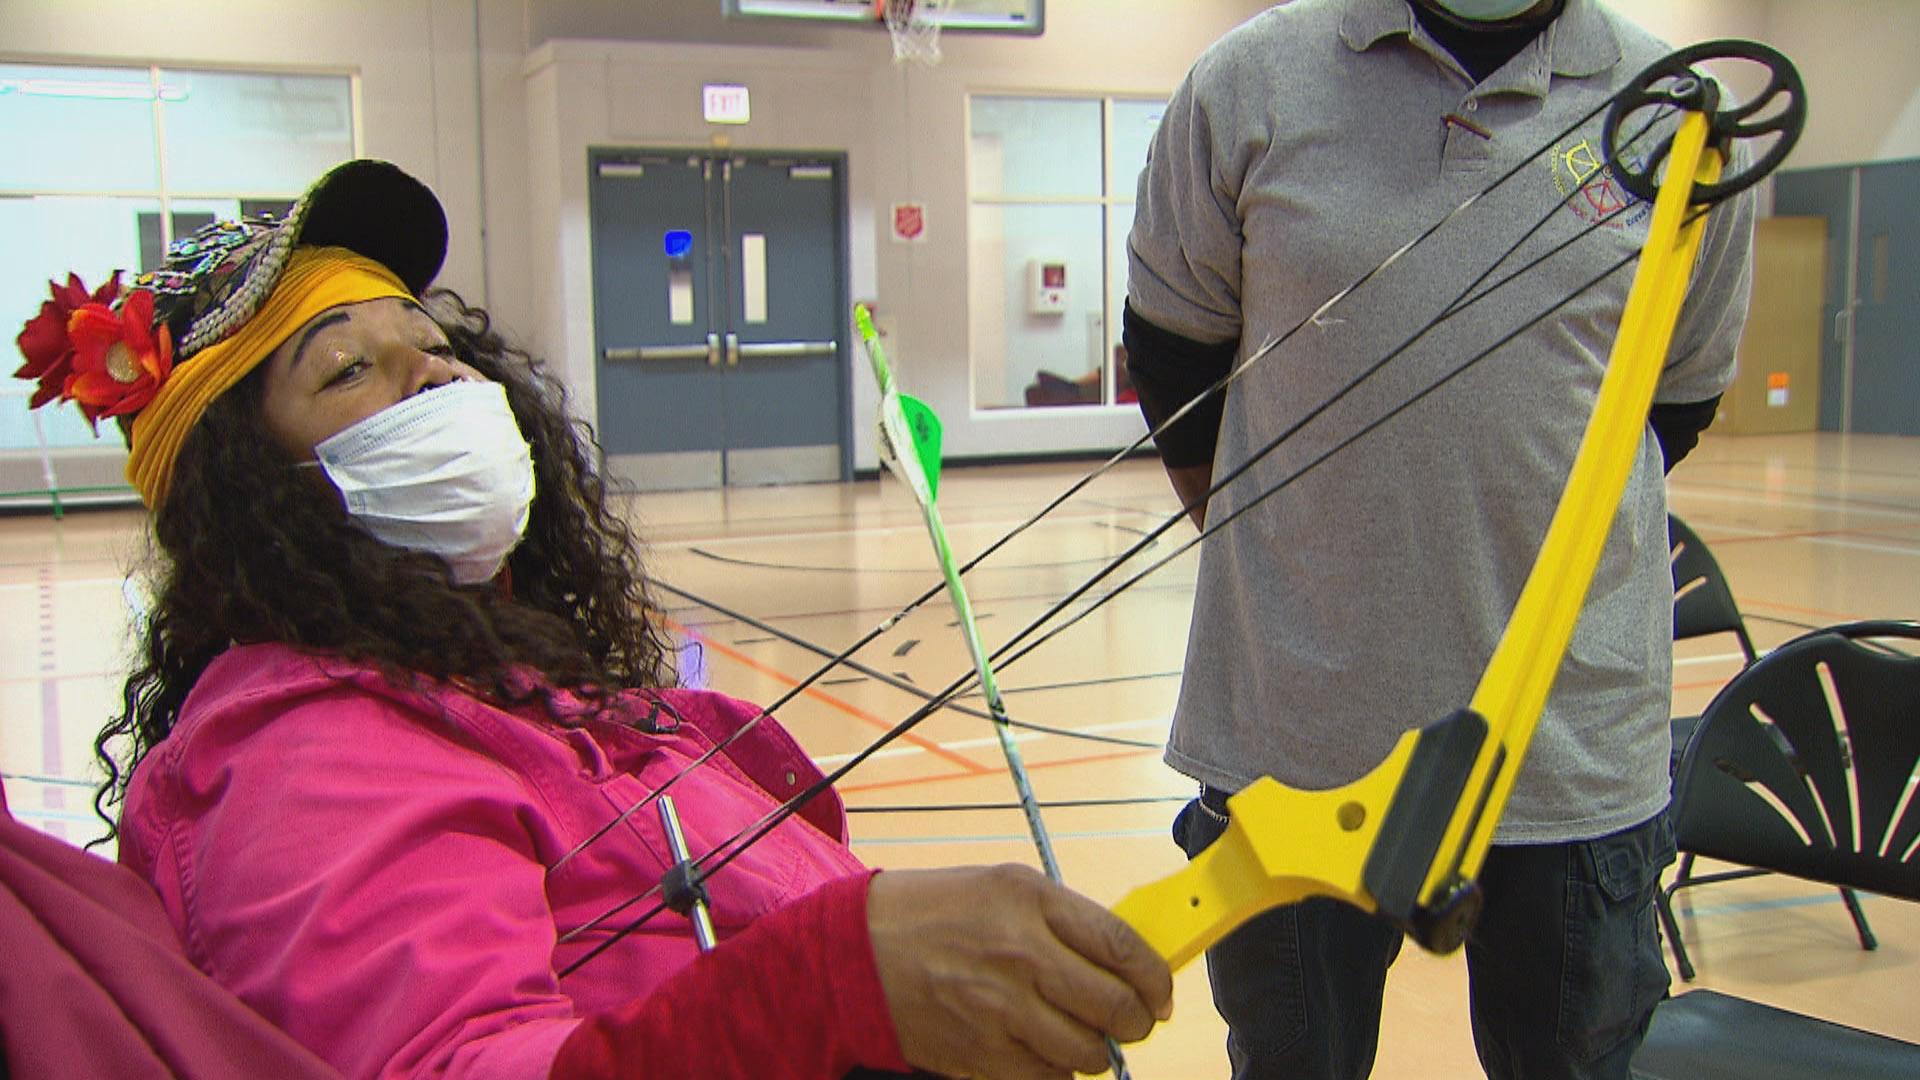 Babette Peyton demonstrates how she fits an arrow to a bowstring, an action called nocking in archery, at the Kroc Center Chicago on Nov. 19, 2020. (WTTW News)